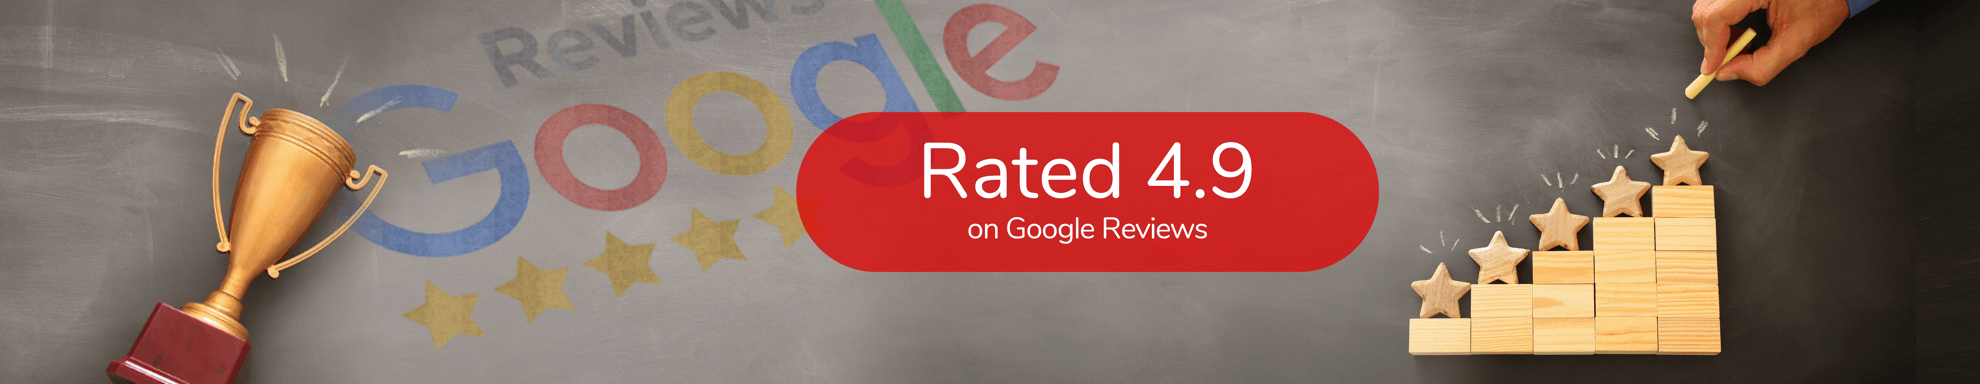 Rated 4.9 on Google